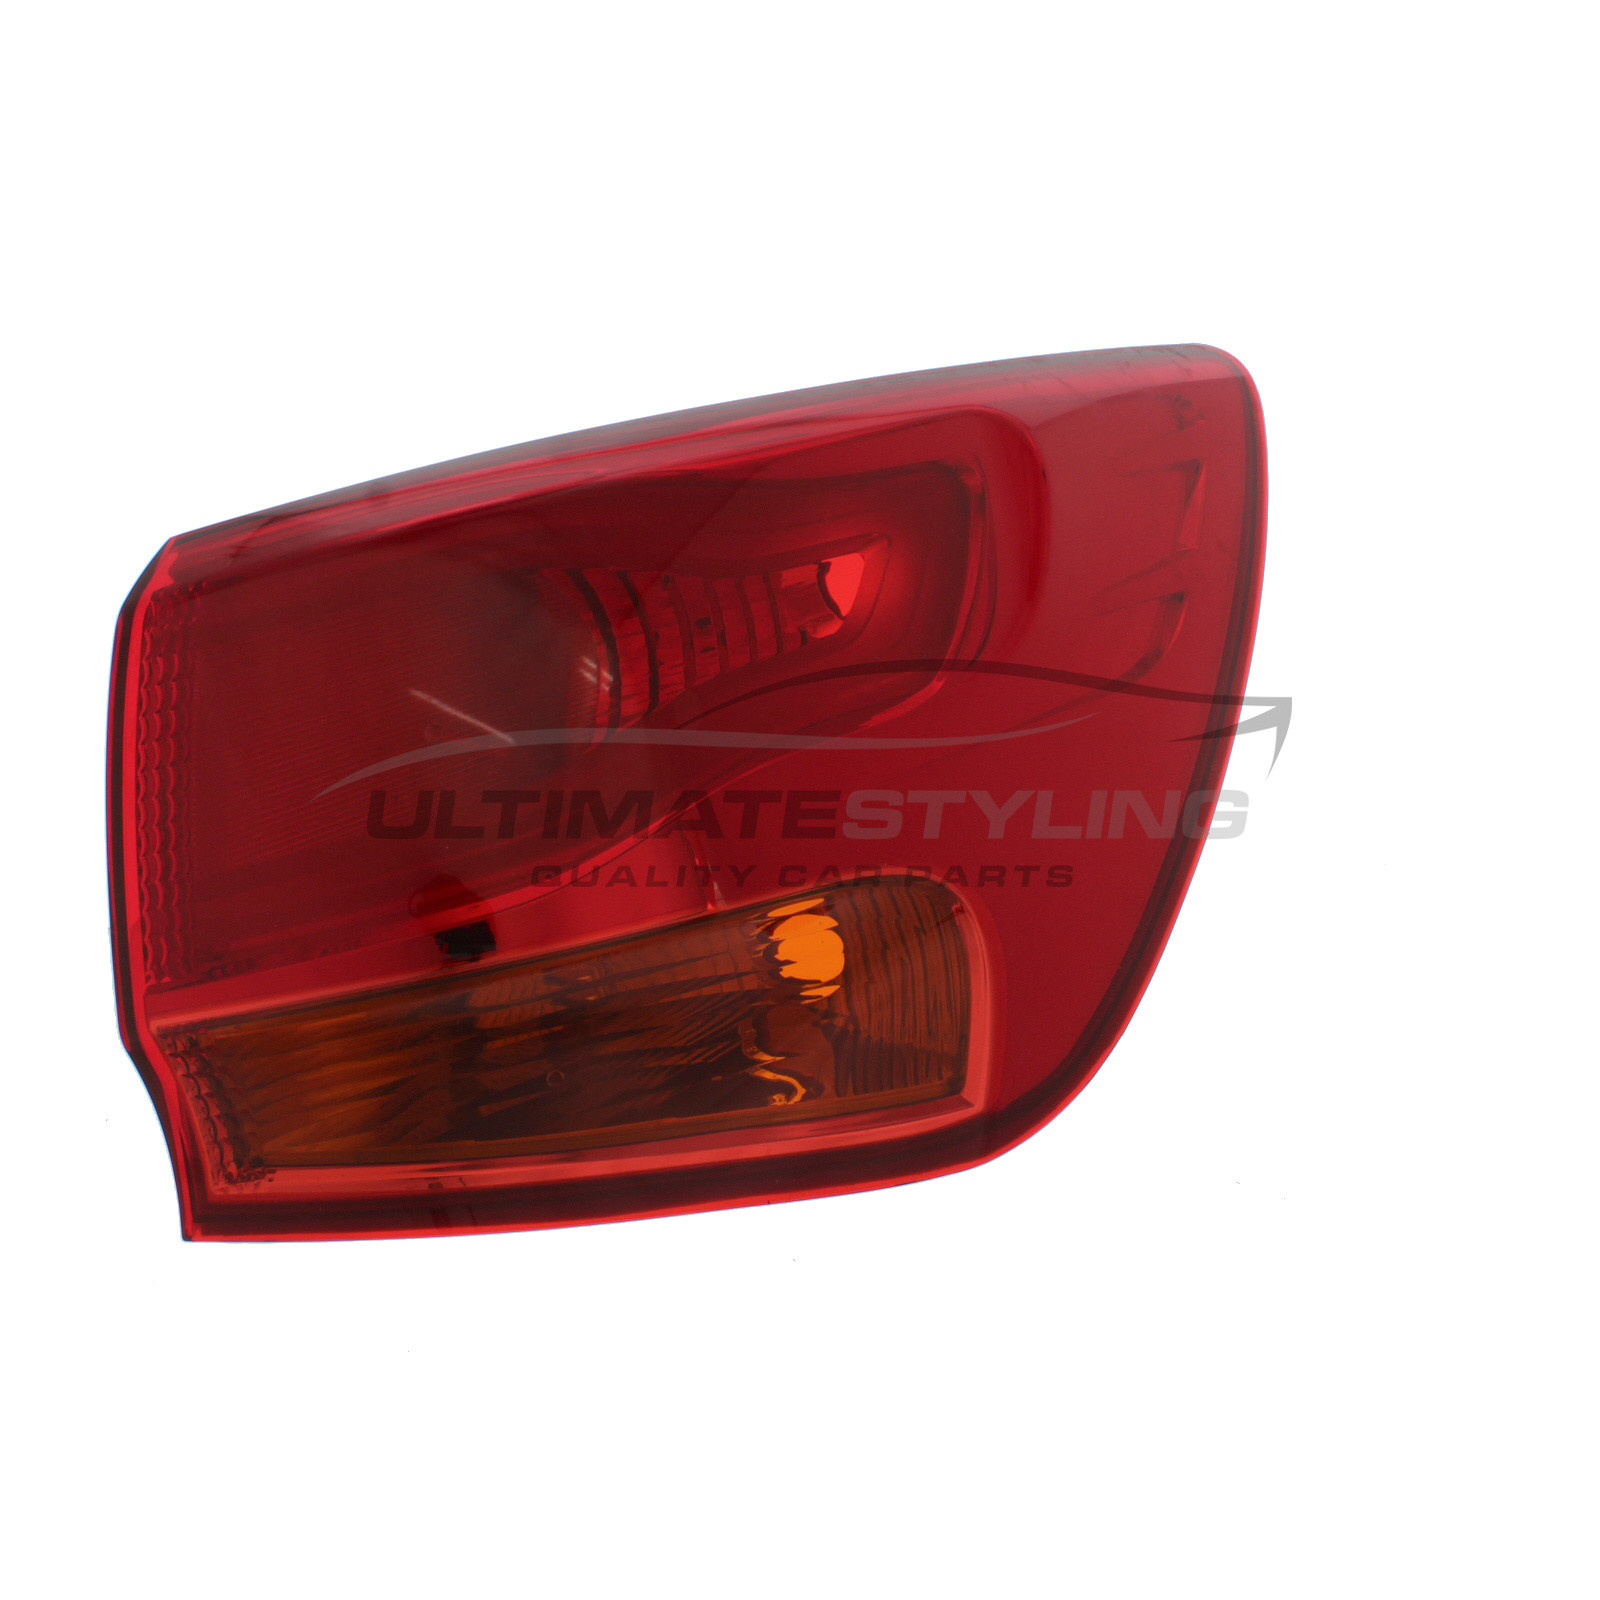 FOR KIA CEED ESTATE 2006-2009 NEW REAR LOWER TAIL LIGHT LAMP RIGHT O/S DRIVER